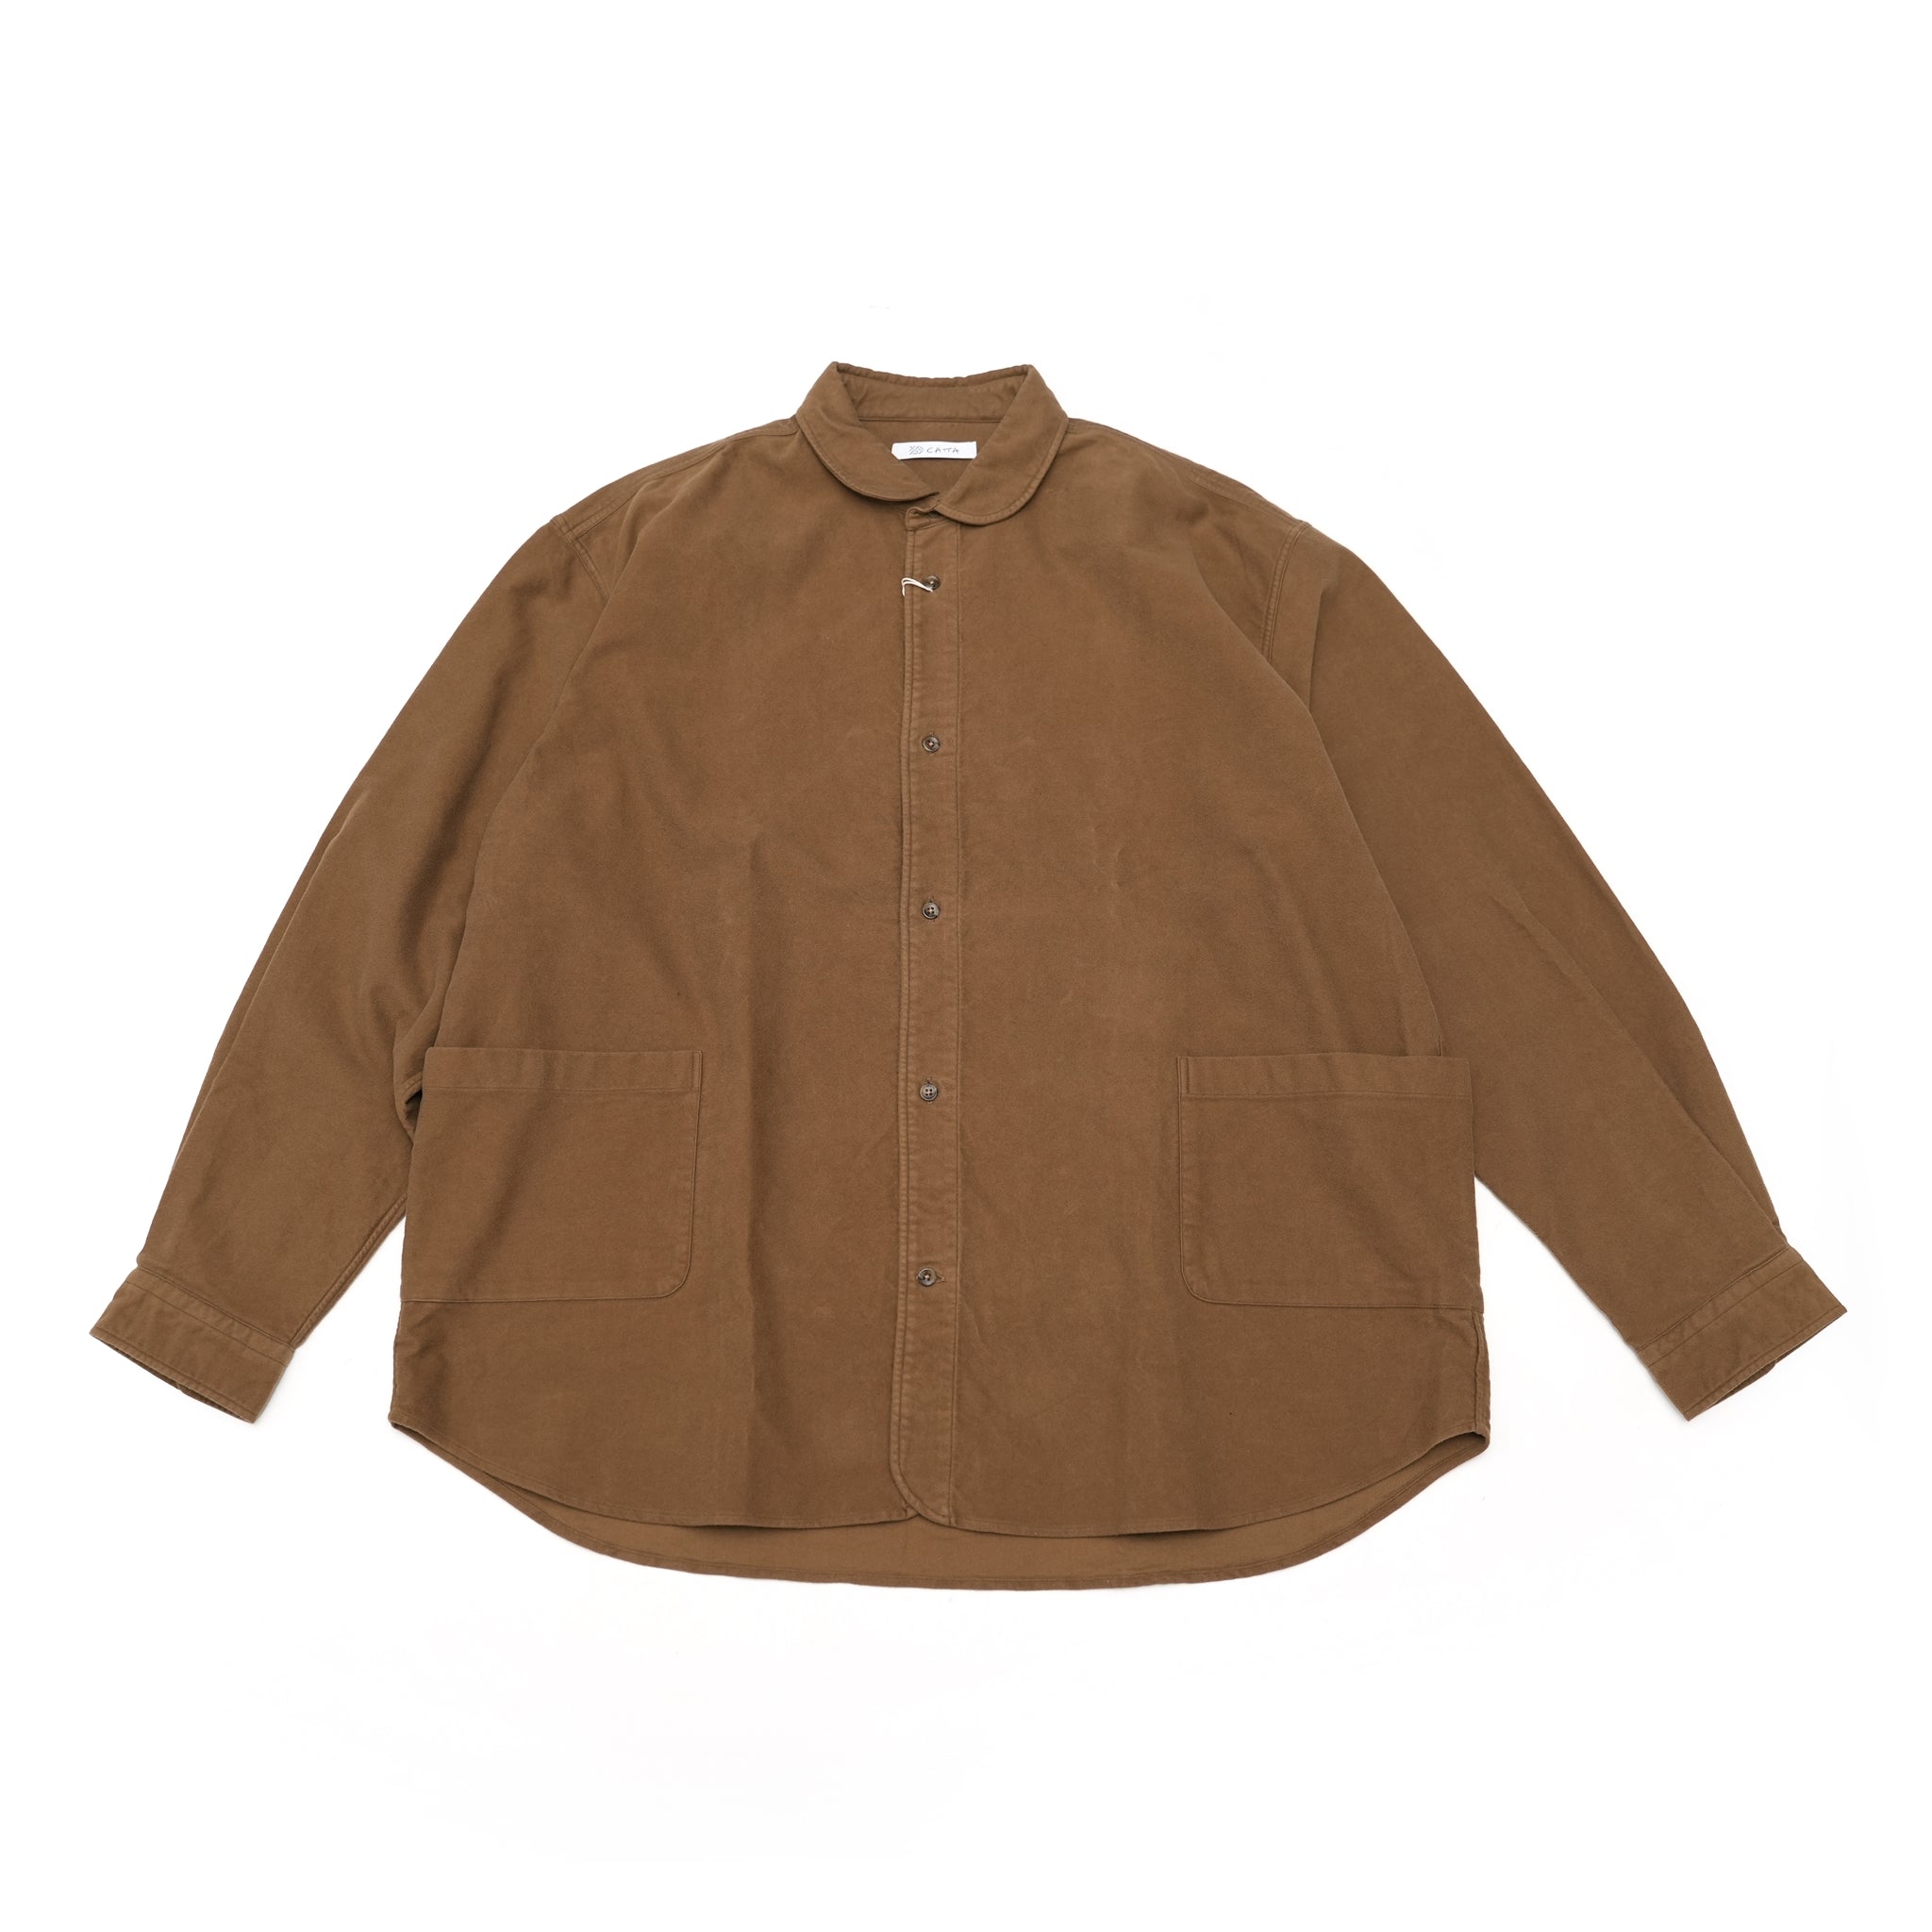 No:SP-02 | Name:Sidepocket Shirts Suede | Color:Black/Brown | Size:L【CATTA_カッタ】